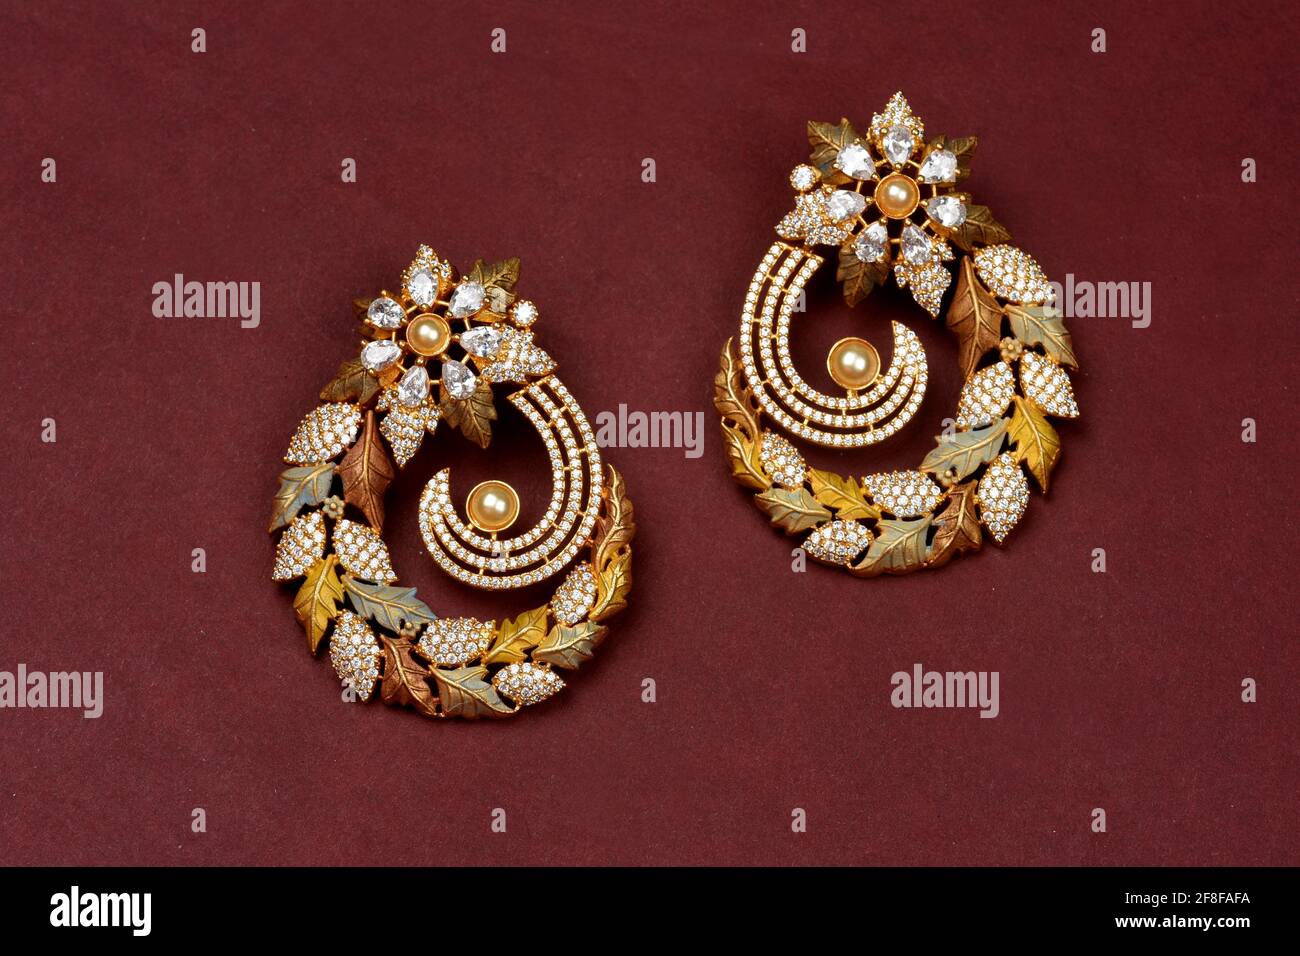 Glamorous antique Golden pair of earrings on red background Indian traditional jewellery, Bridal Gold earrings wedding jewellery, Vintage earring Stock Photo